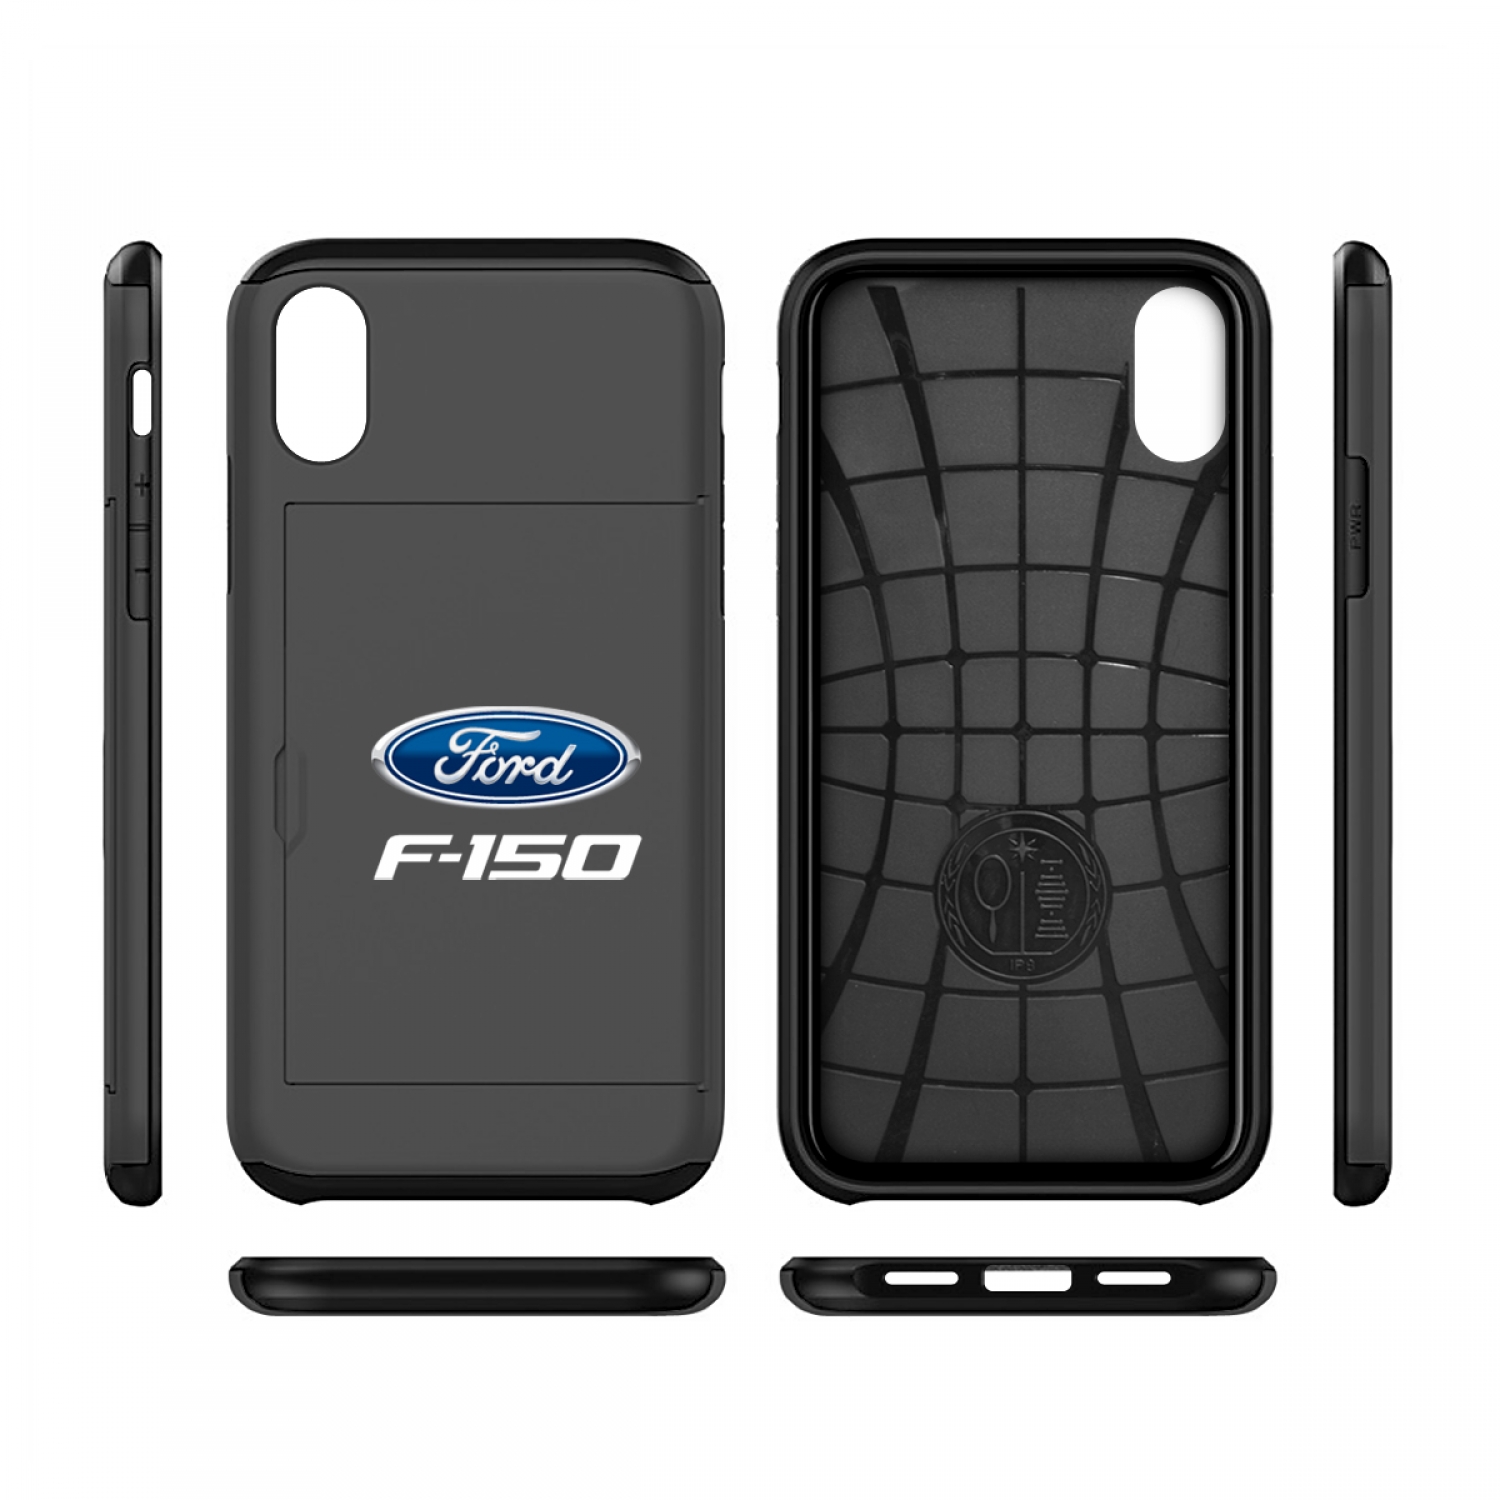 Ford F-150 iPhone X Black Shockproof with Card Holder Cell Phone Case